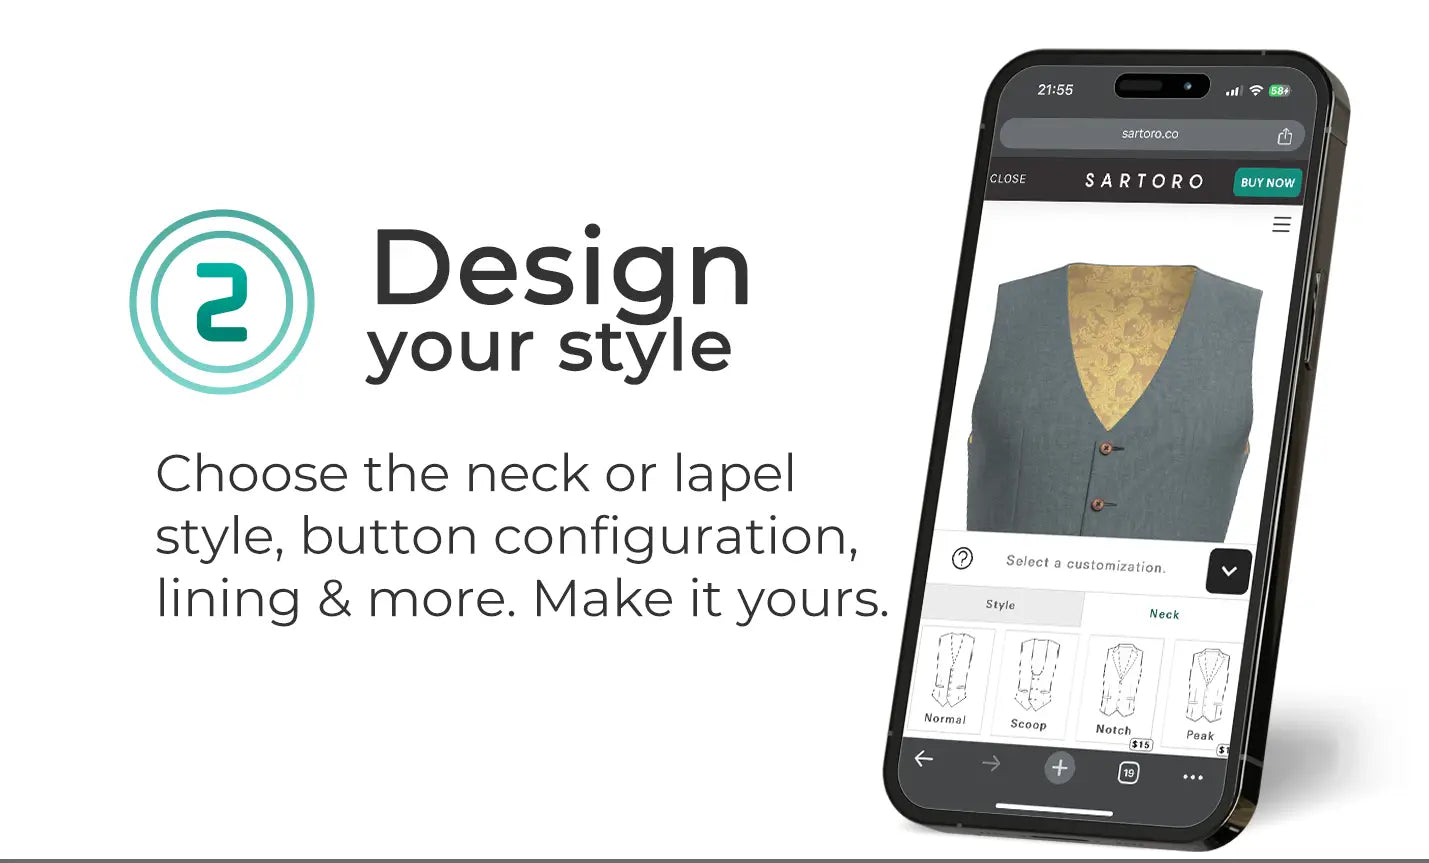 Design your style. Choose the neck or lapel style, button configuration, lining & more. Make it yours.